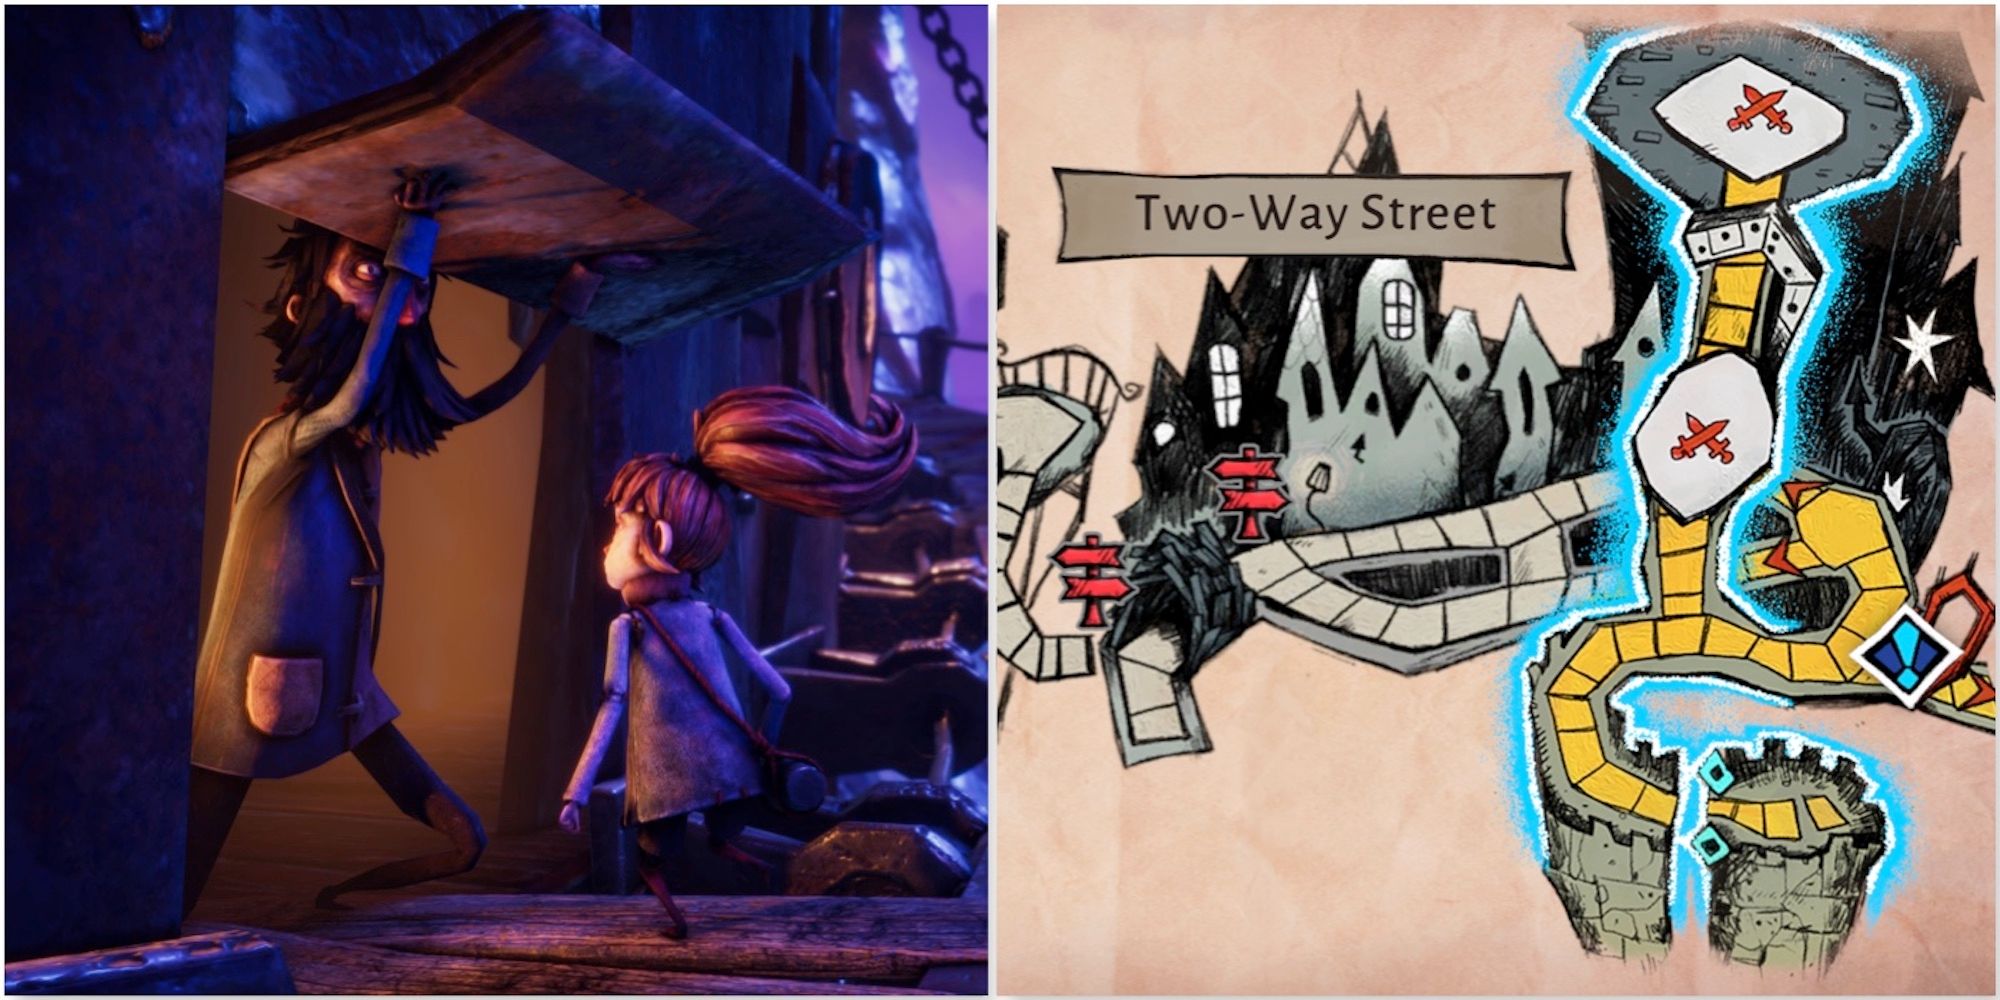 Characters in a cutscene and the map from Lost in Random